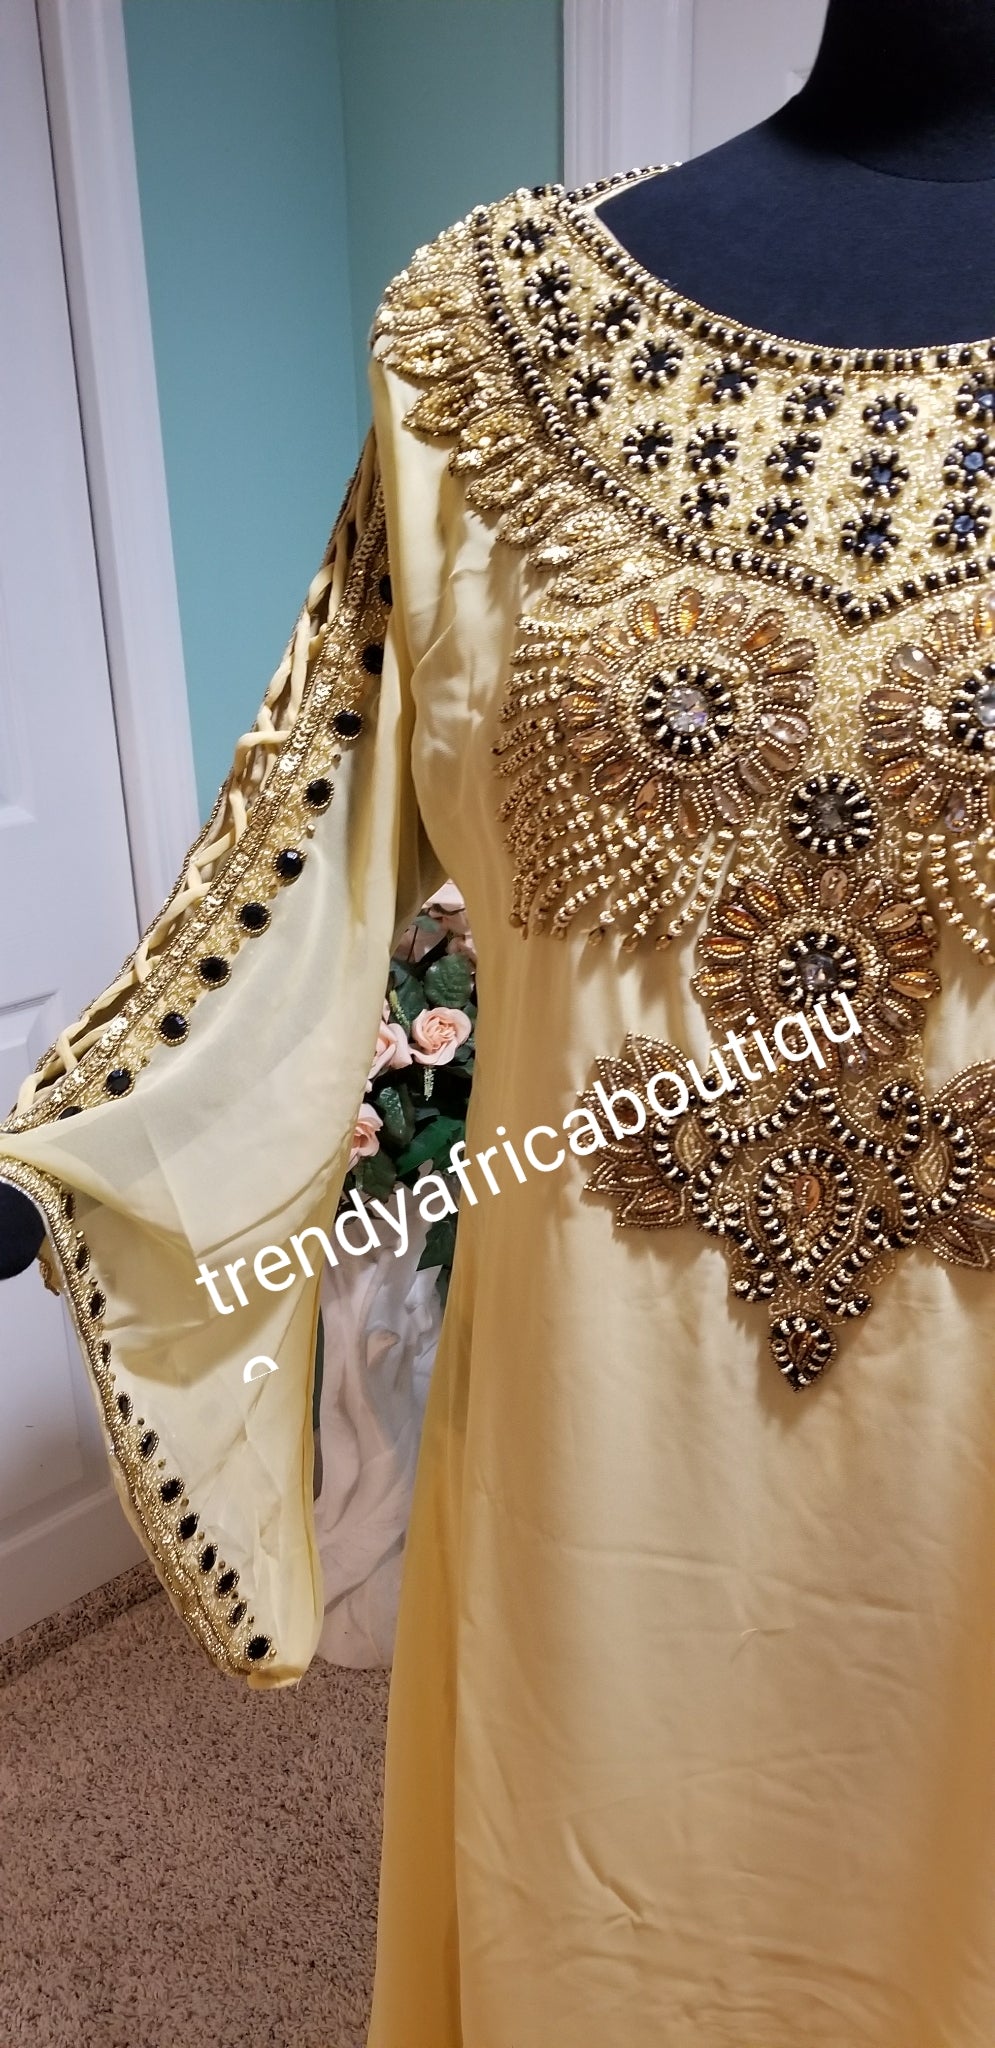 New arrival long free flowing India kaftan dress. Quality beaded and stones. Flared sleeve. Women Dubai kaftan. 60 inch long. Champagne gold